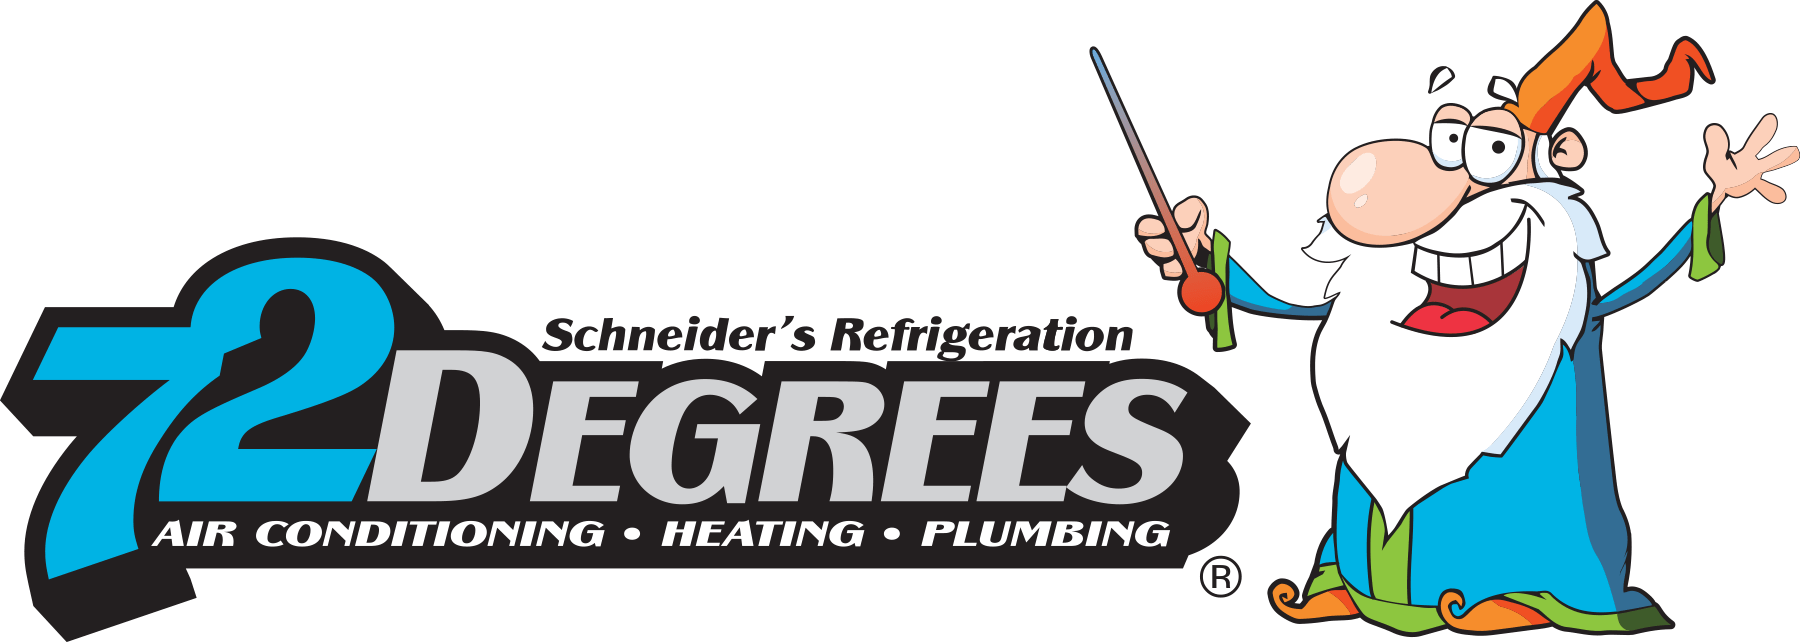 Air Conditioner Repair Service Boerne TX | 72 Degrees Air Conditioning, Heating & Plumbing.